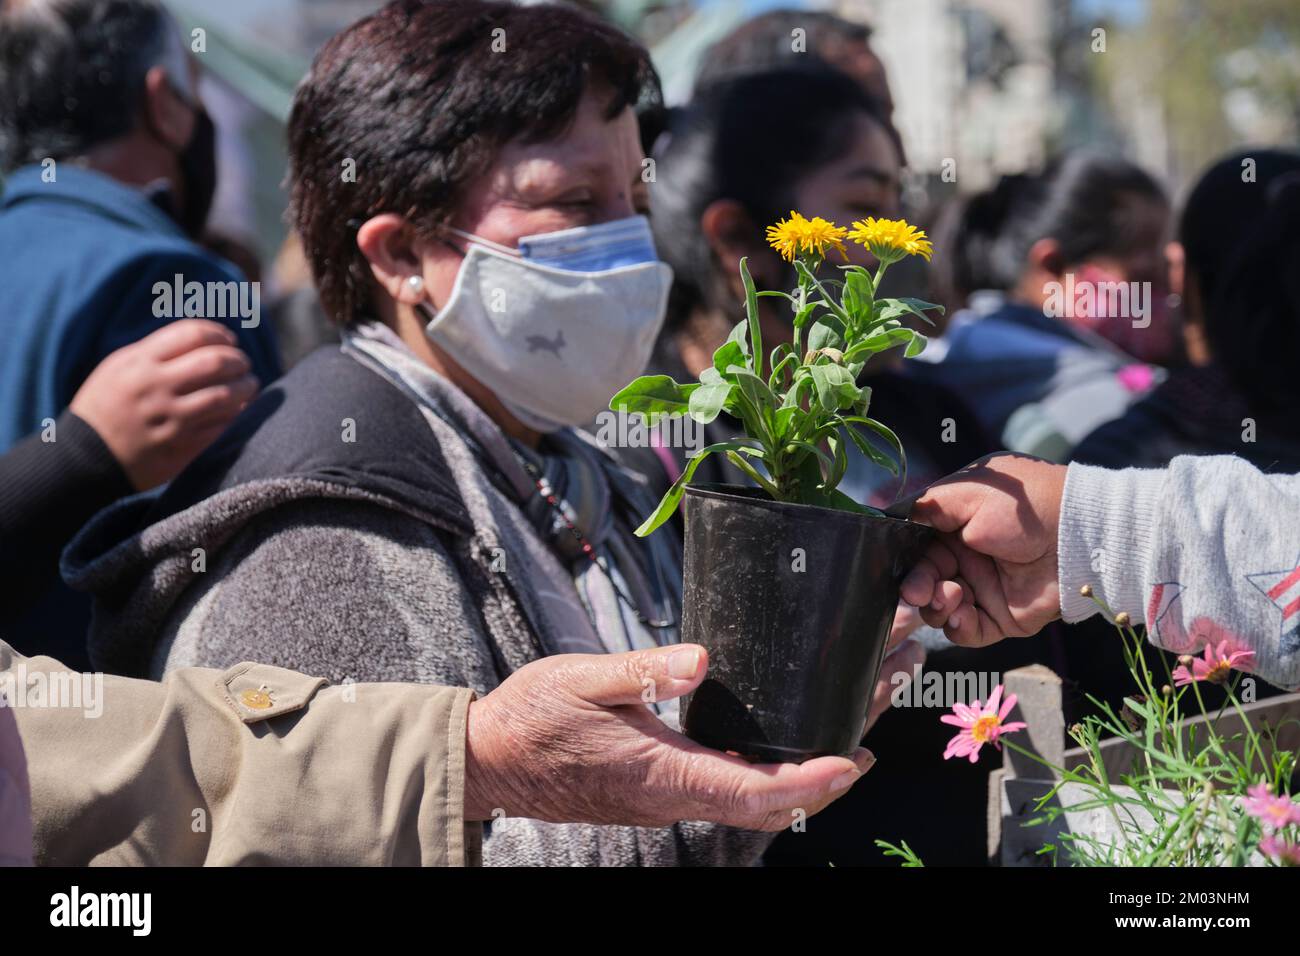 Buenos Aires, Argentina, 21 sept, 2021: UTT, Union de Trabajadores de la Tierra, Land Workers Union, gave free flowers, fruits and vegetables to draw Stock Photo